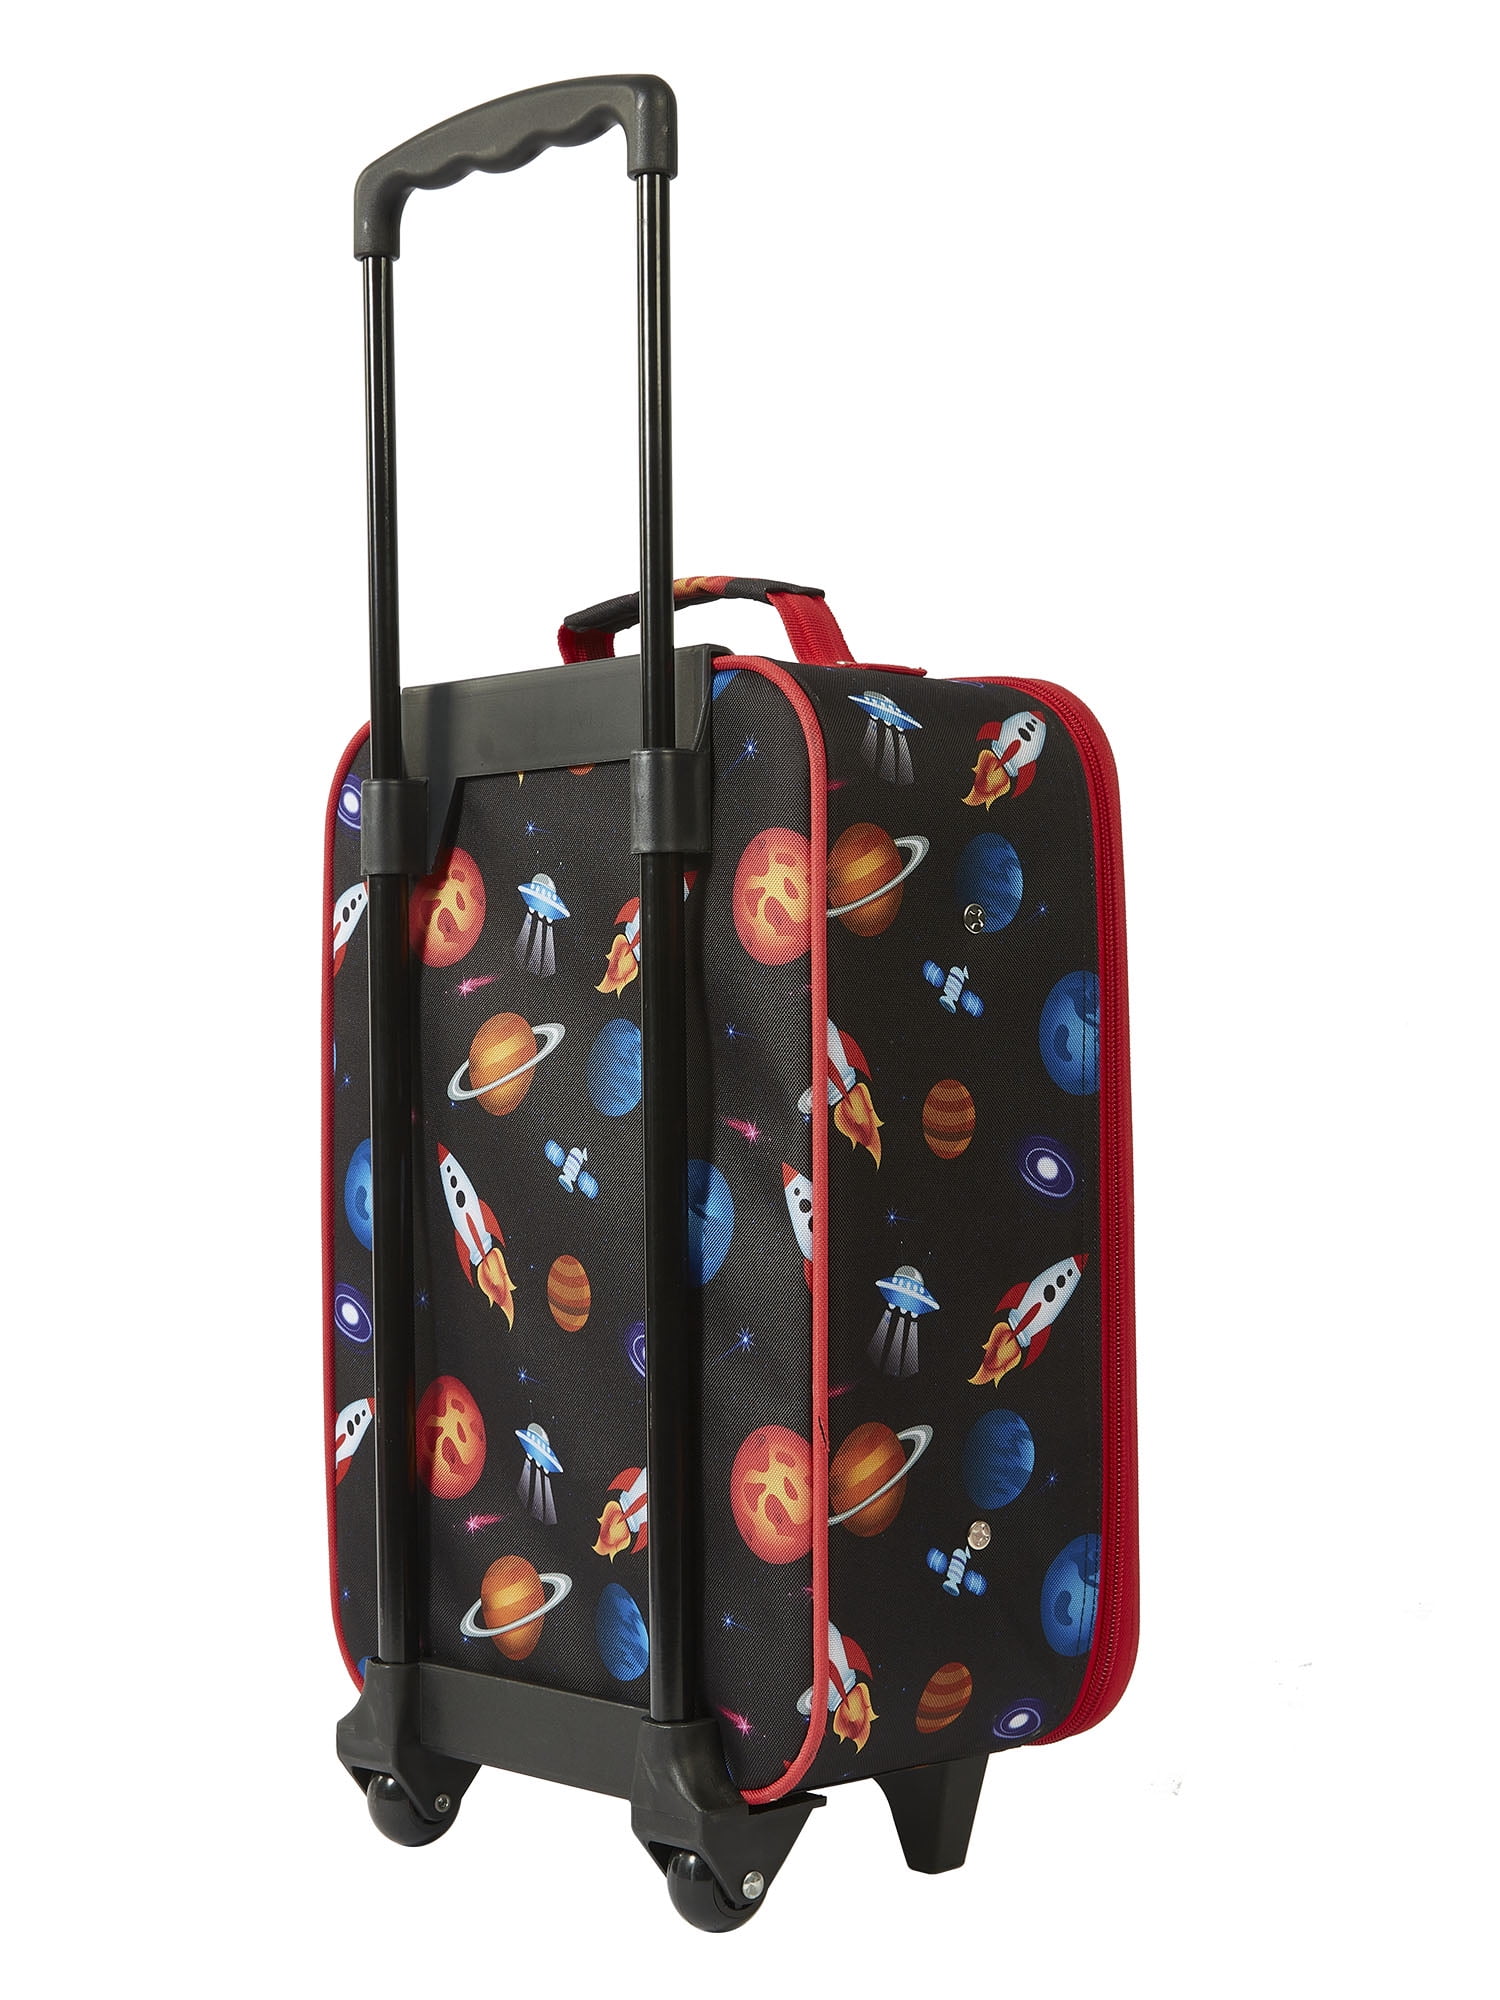 Protege Kids 18 inch Hardside Carry on Kids Luggage, Candy, ( Exclusive), Size: 7.88 Large x 12.8 W x 17.72 H